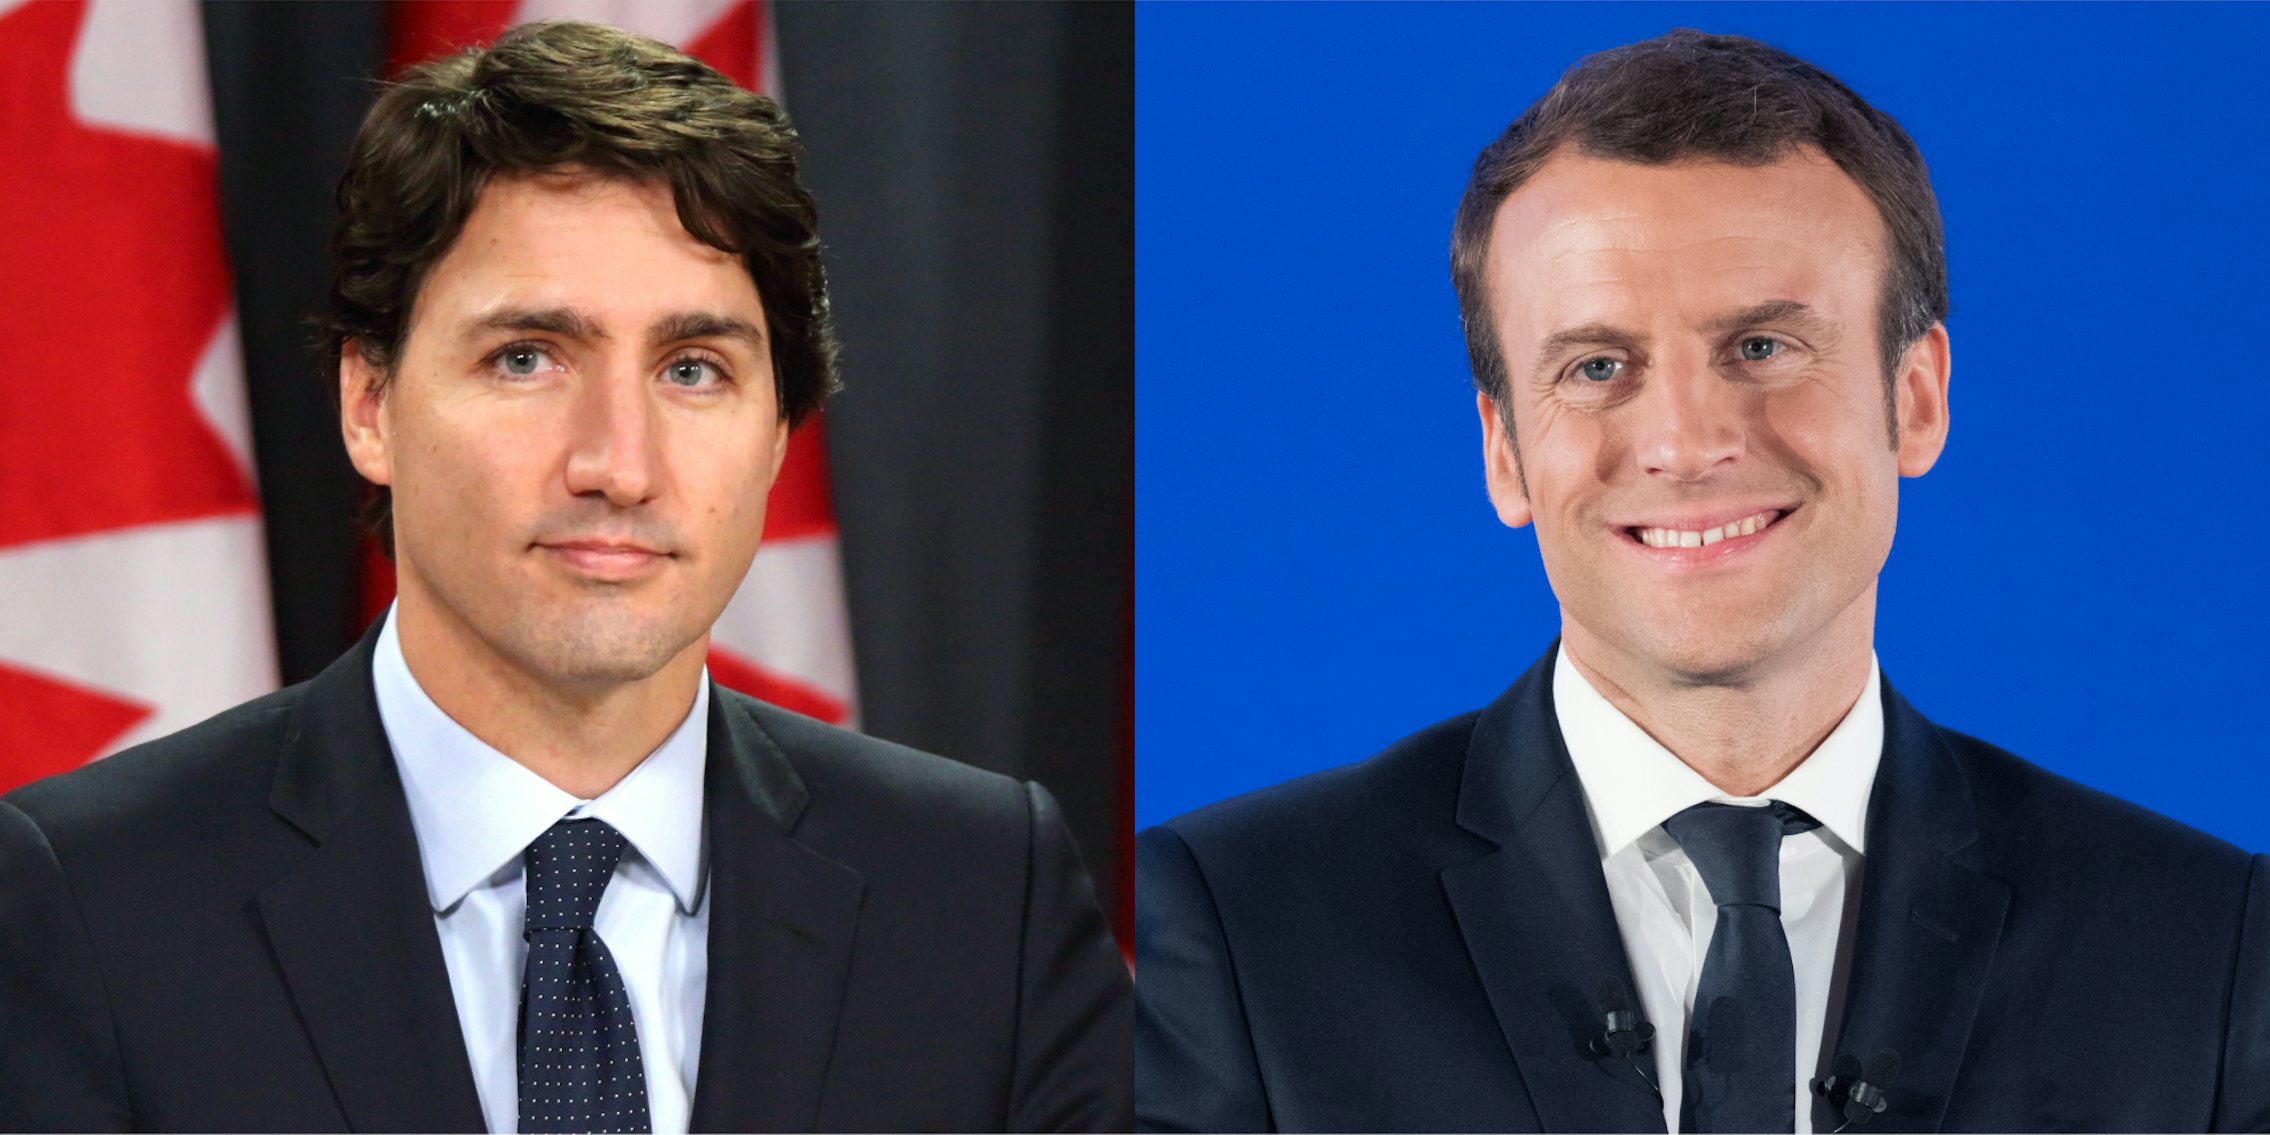 Justin Trudeau in front of red and black background (l) Emmanuel Macron in front of blue background (r)